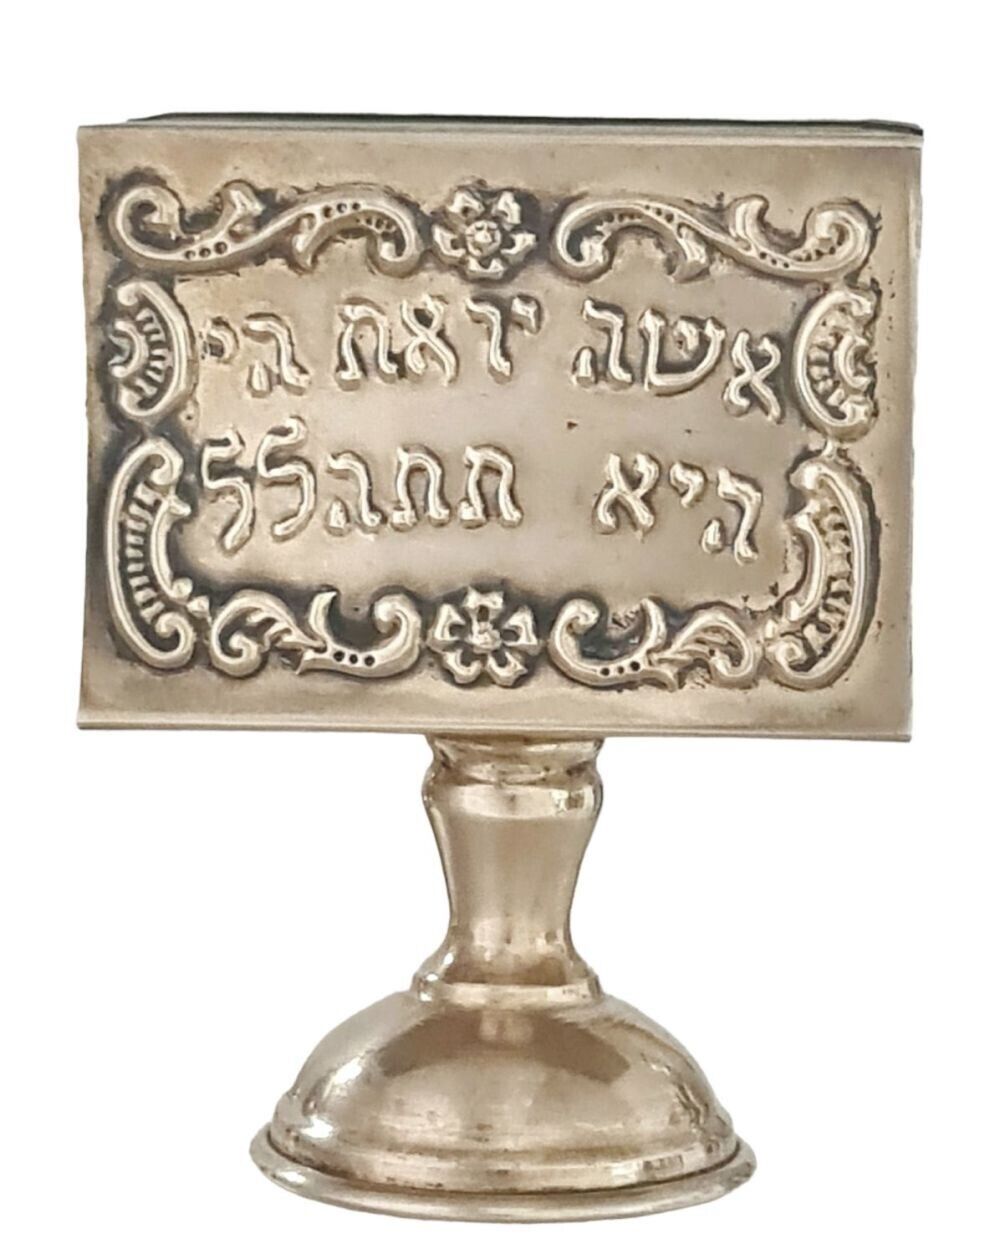 Light up your Shabbat with our beautiful silver matchbox holder